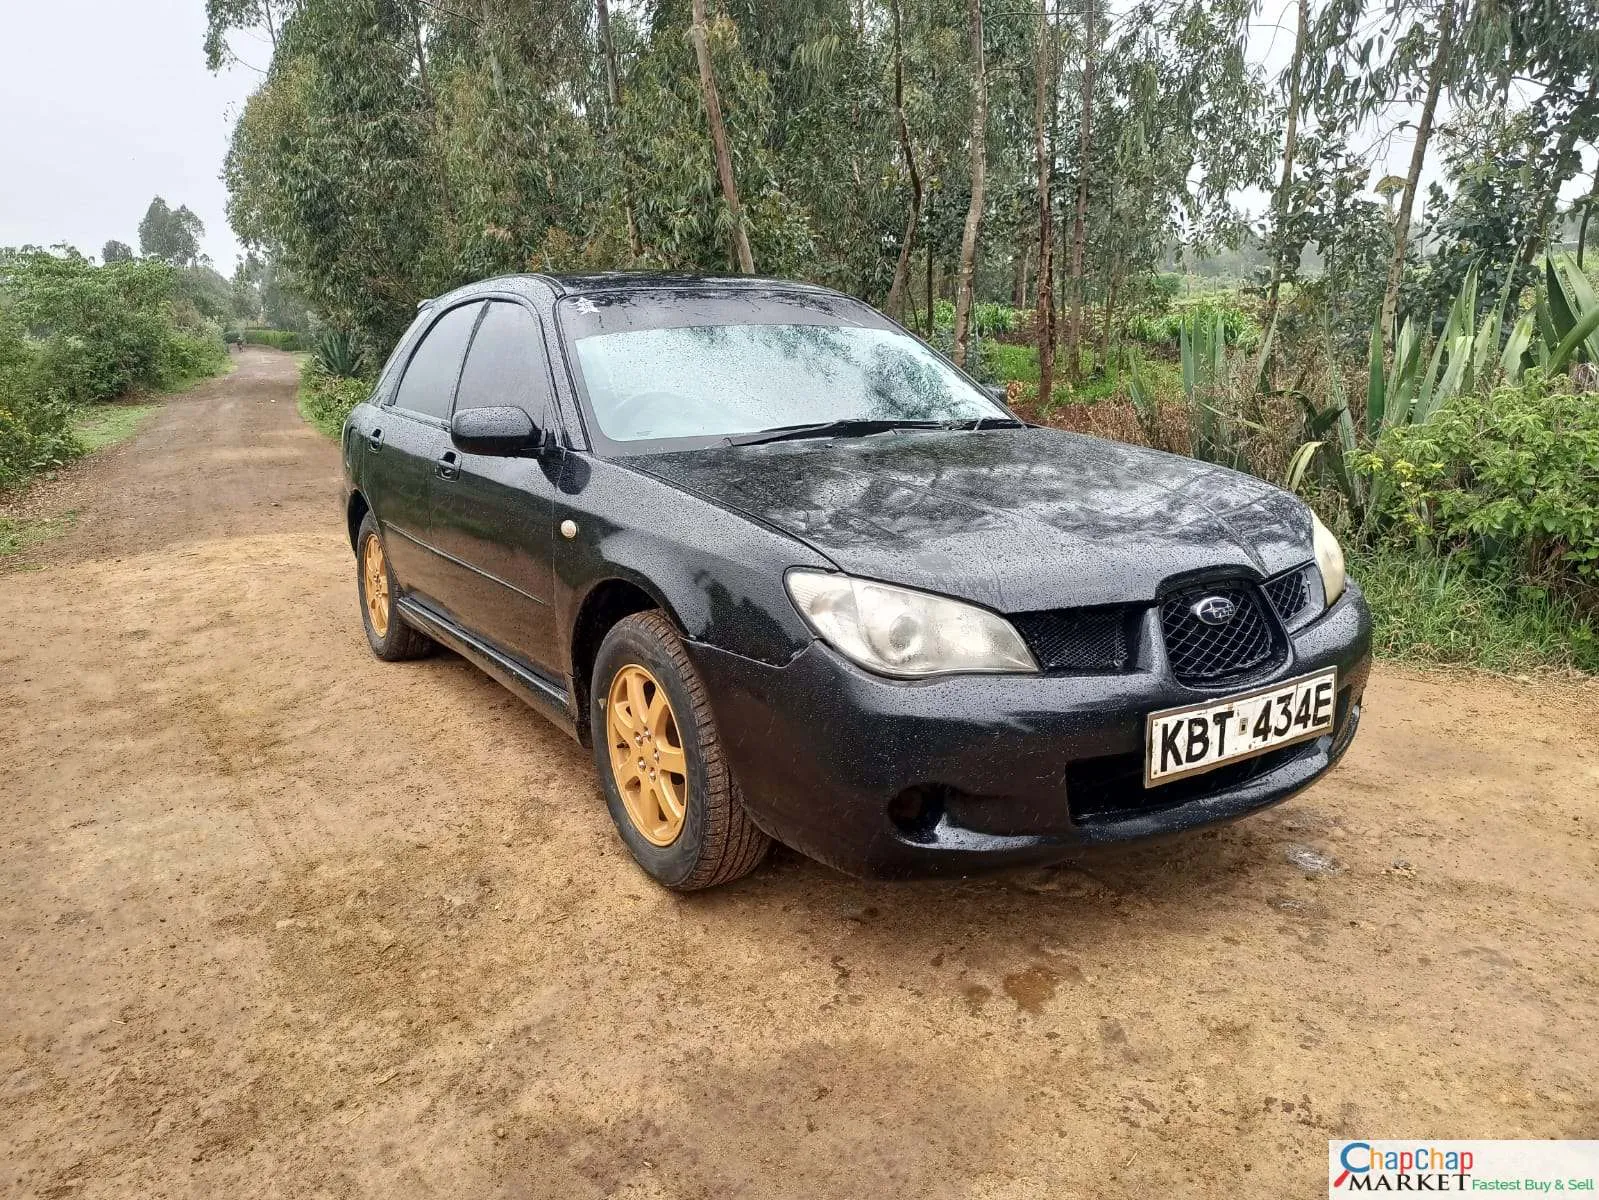 Cars Cars For Sale/Vehicles-Subaru Impreza GG2 You Pay 30% deposit INSTALLMENTS Trade in Ok 9